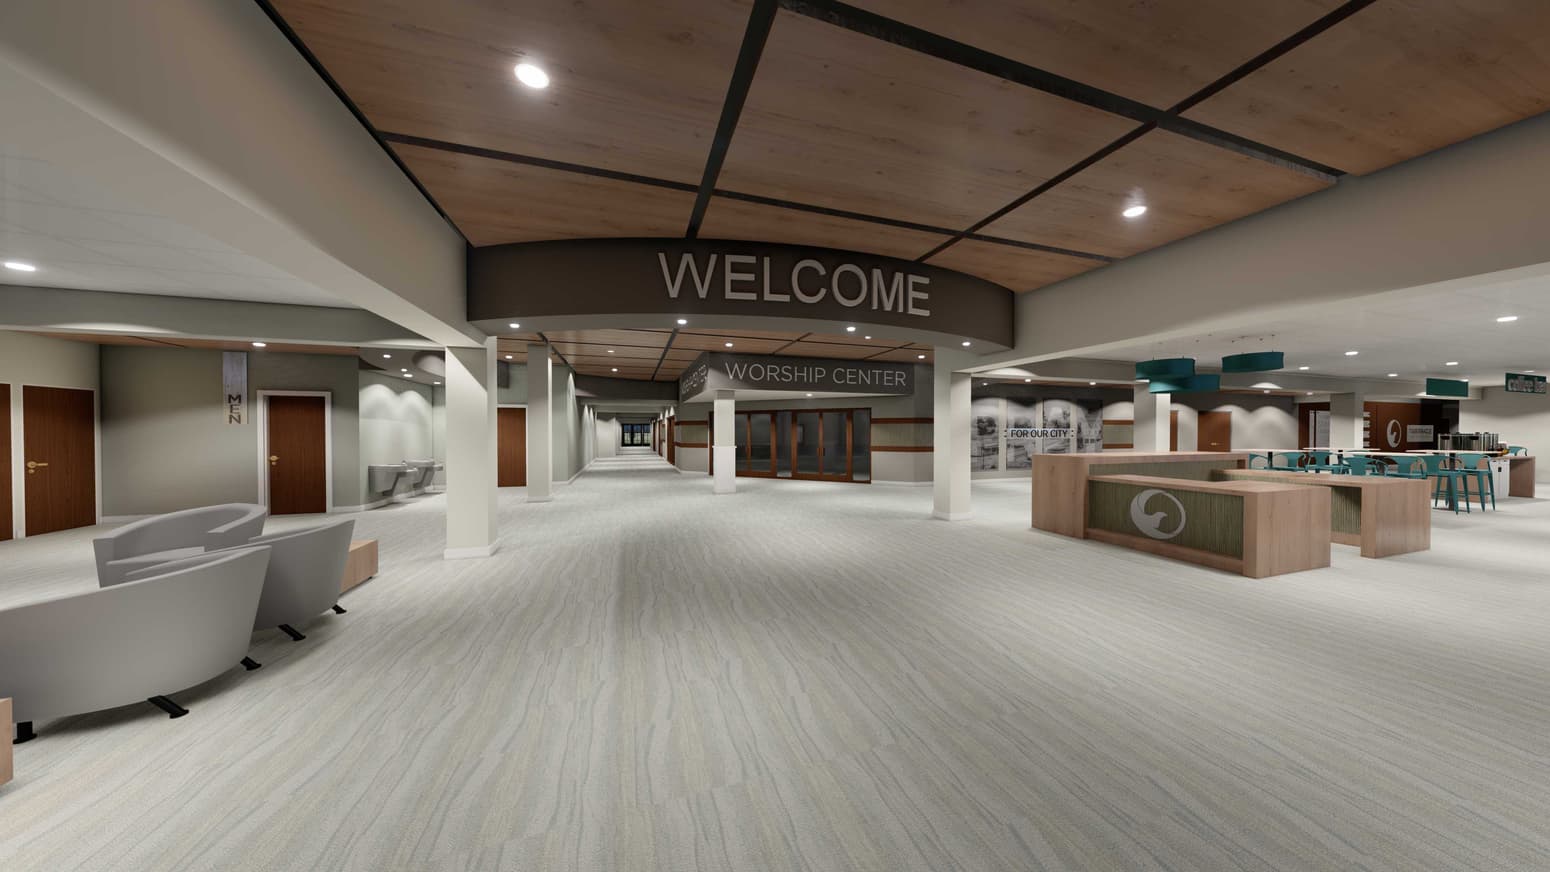 Auditorium design project featuring a spacious Welcome center.